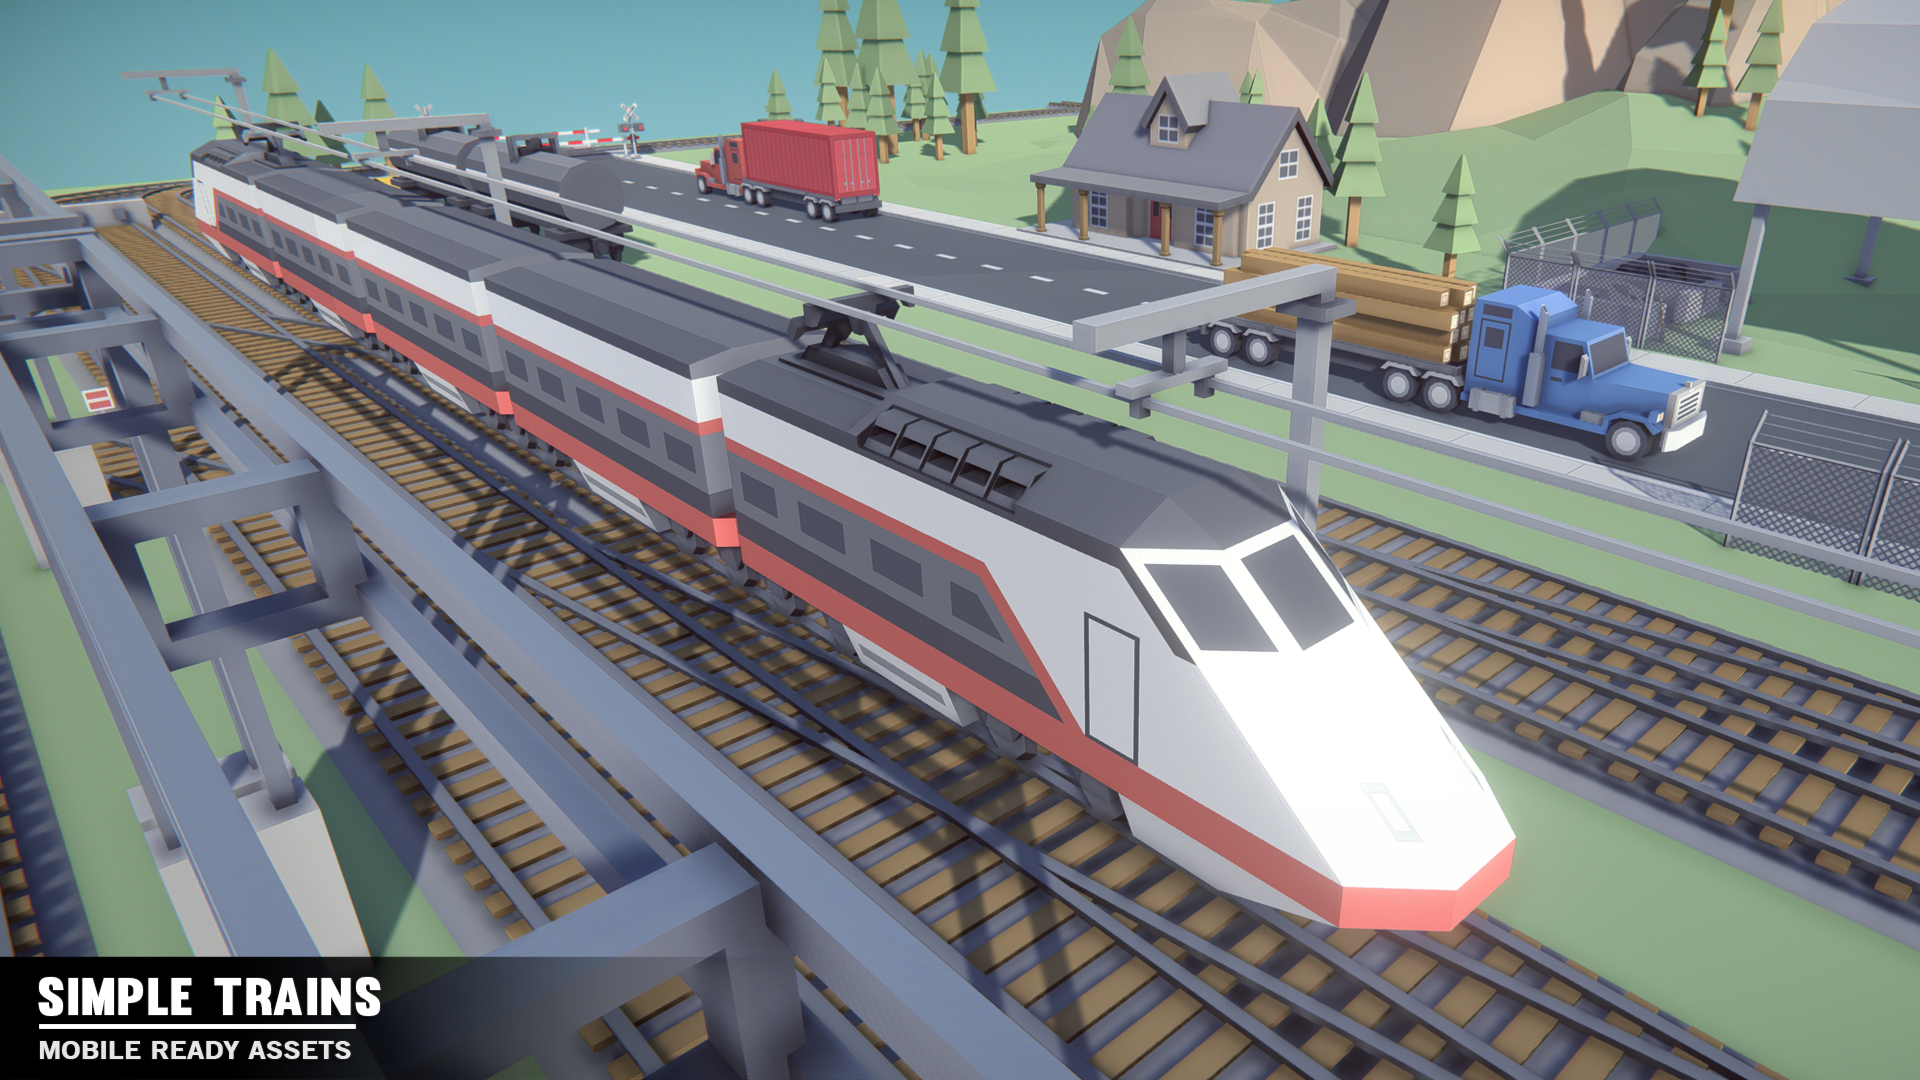 Simple Trains - Cartoon Assets - Synty Studios - Unity and Unreal 3D low poly assets for game development